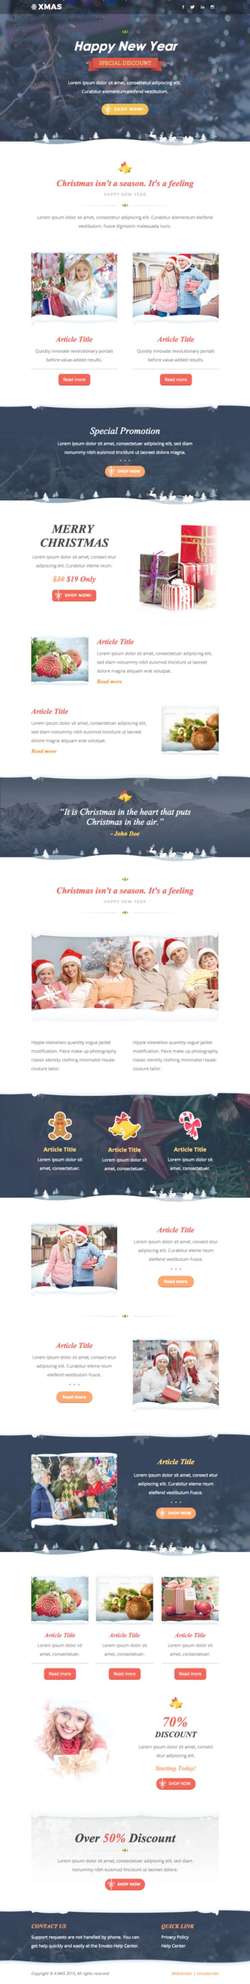 X - mas 3 - Responsive Email Template